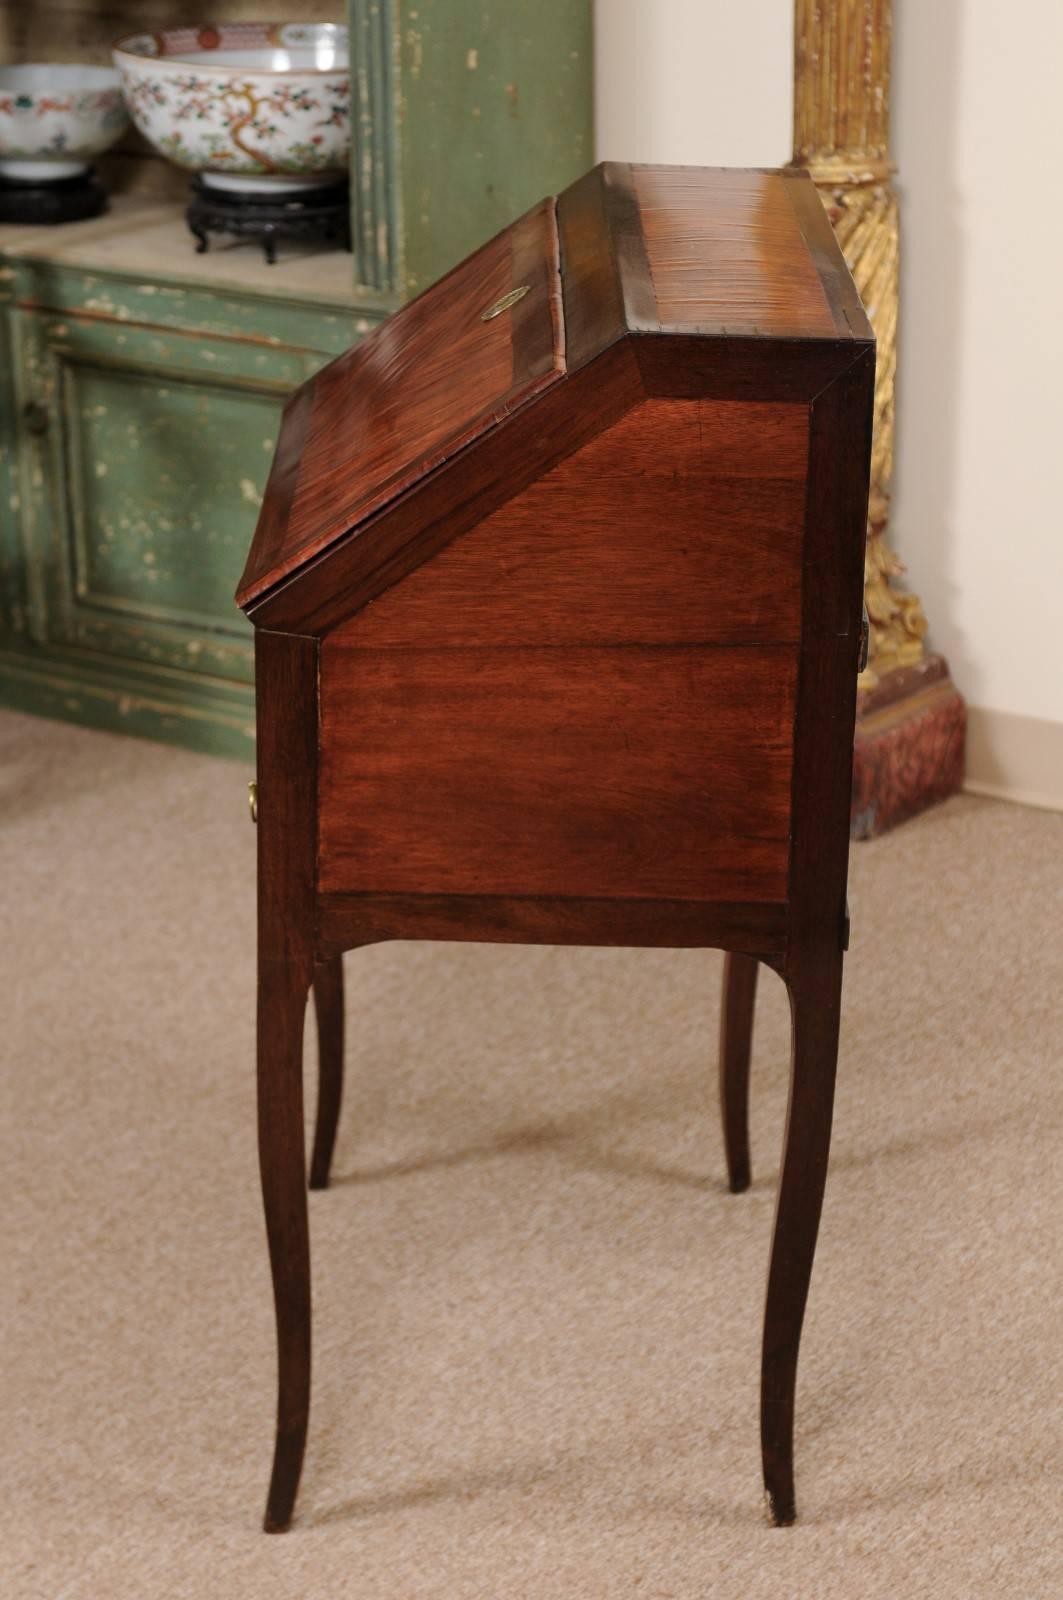 Petite Slant-Front Bureau in Kingwood with Fitted Interior & Leather Blotter For Sale 4